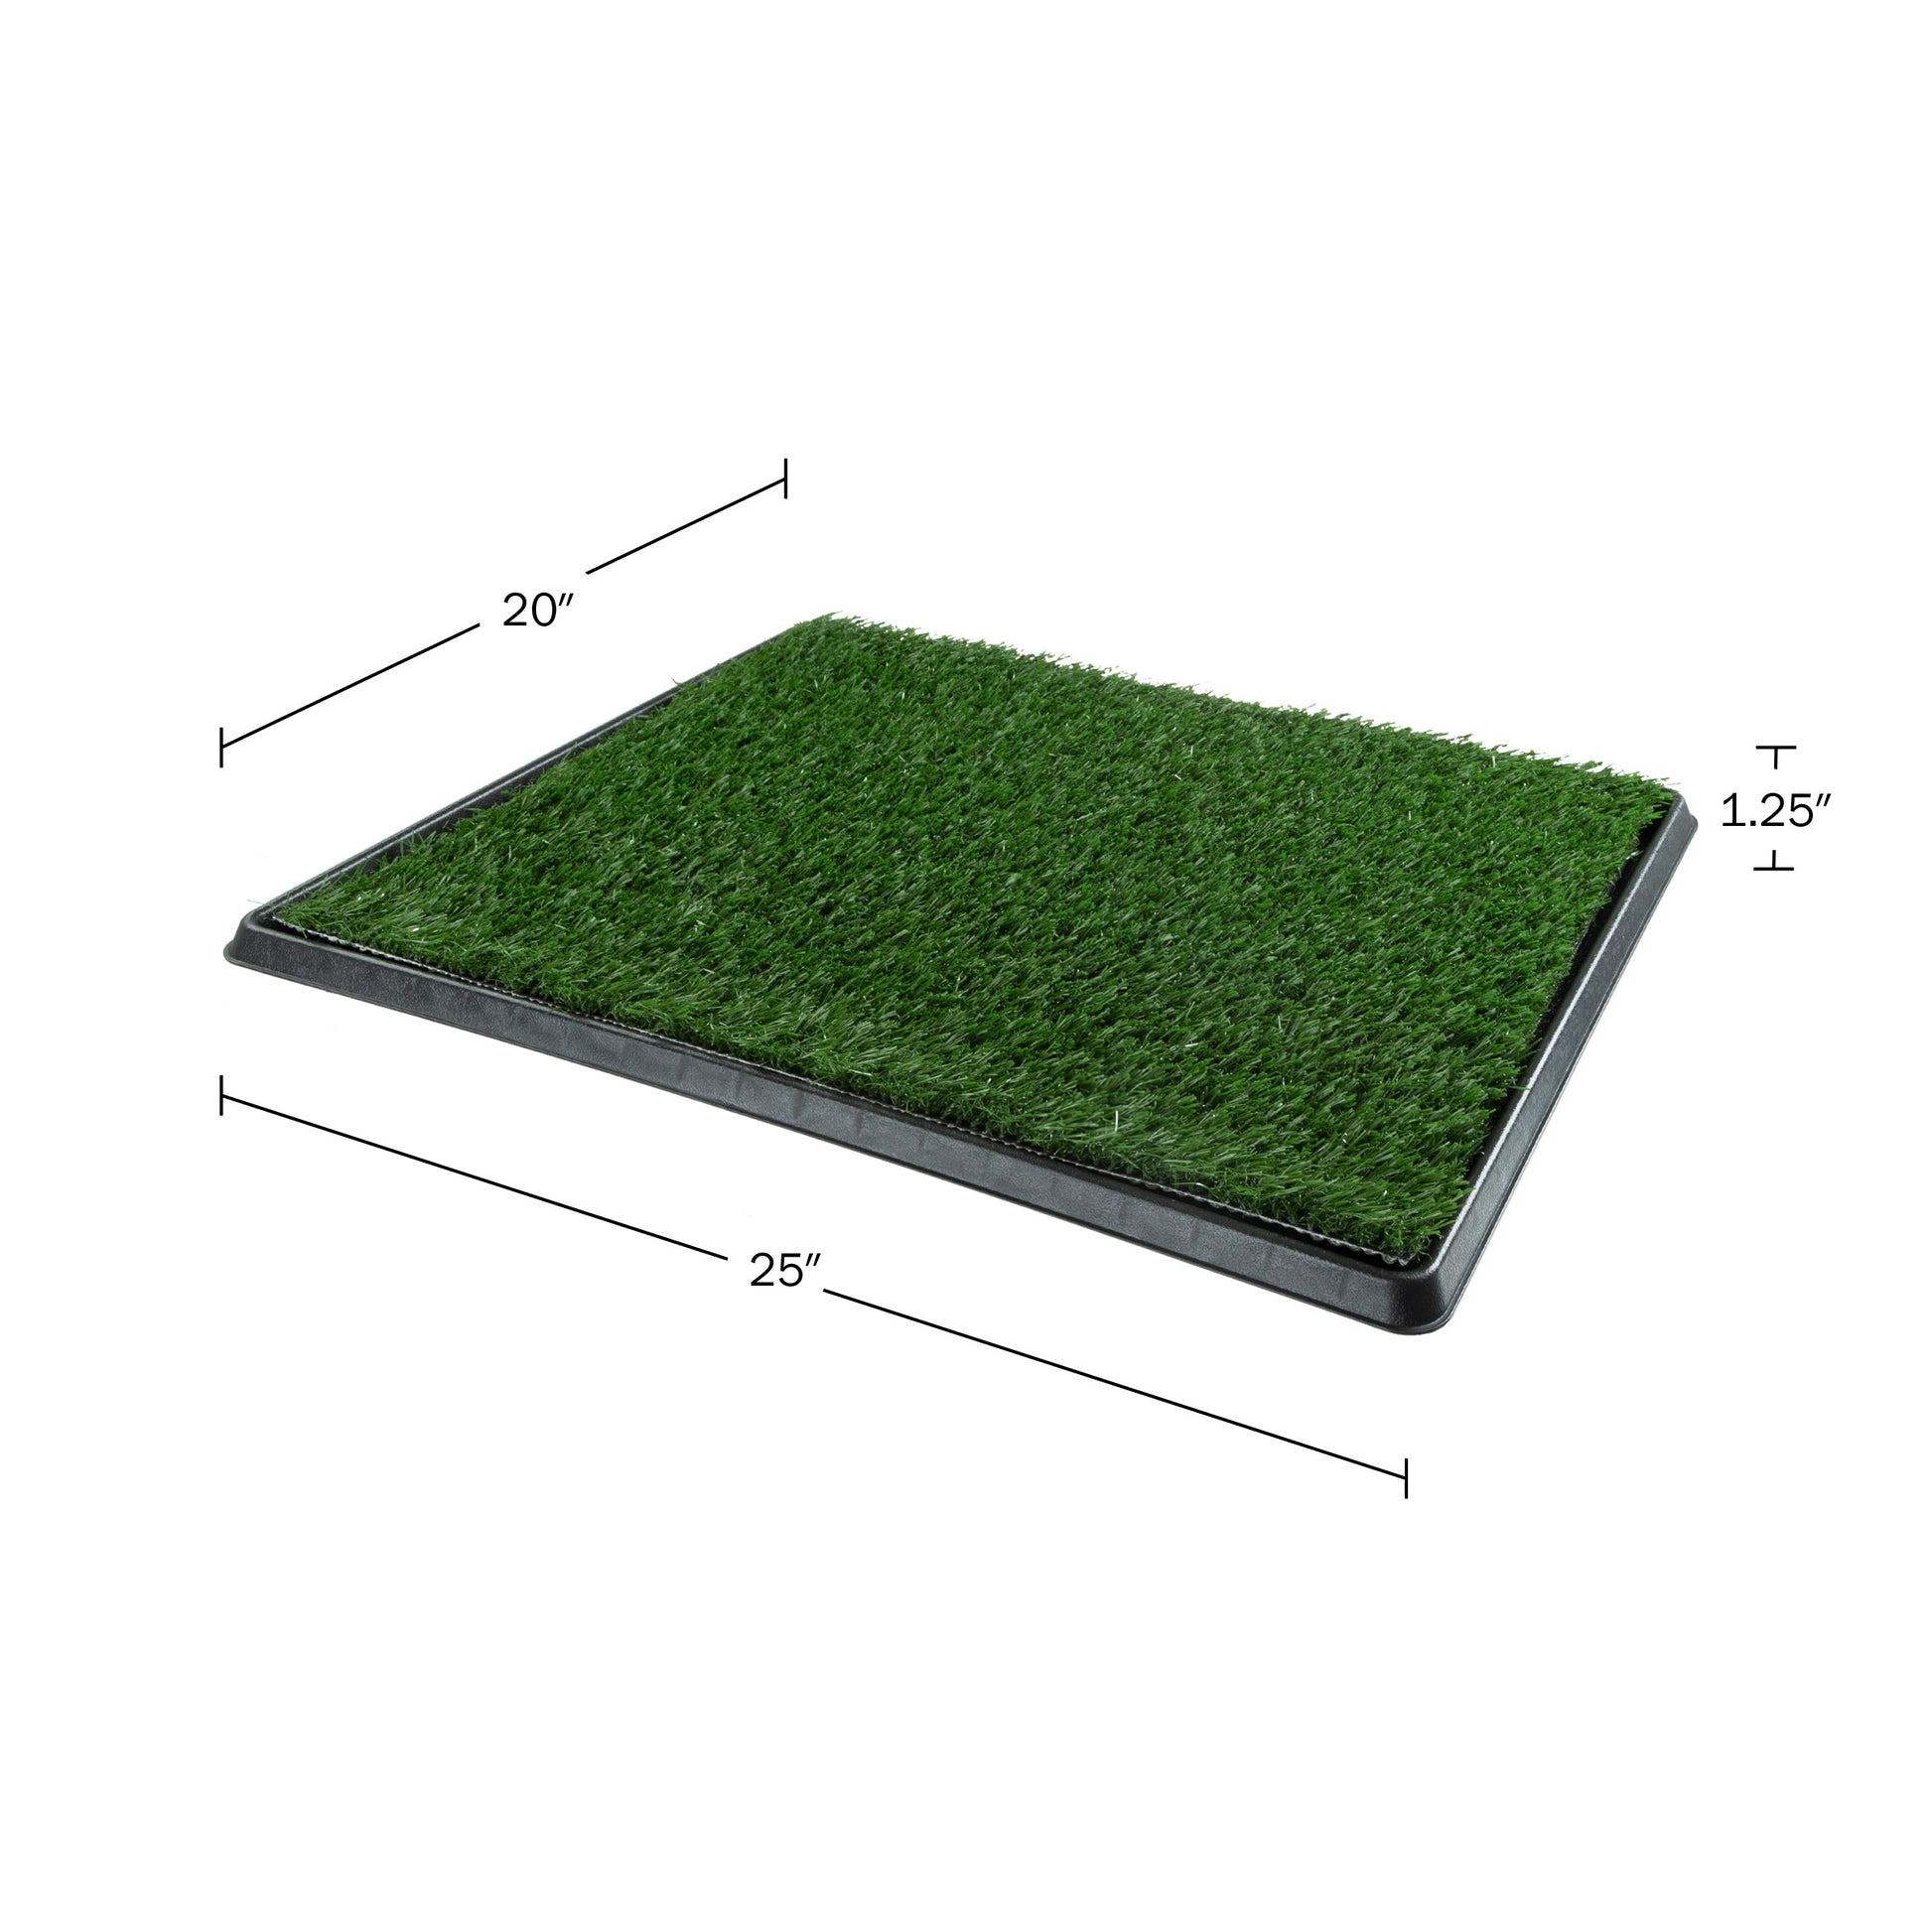 Dog Grass Pad with Tray, Artificial Grass Mats Washable Grass Pee Pads for Dogs, Pet Toilet Potty Tray for Puppy & Small Pet, Dogs Turf Potty Training